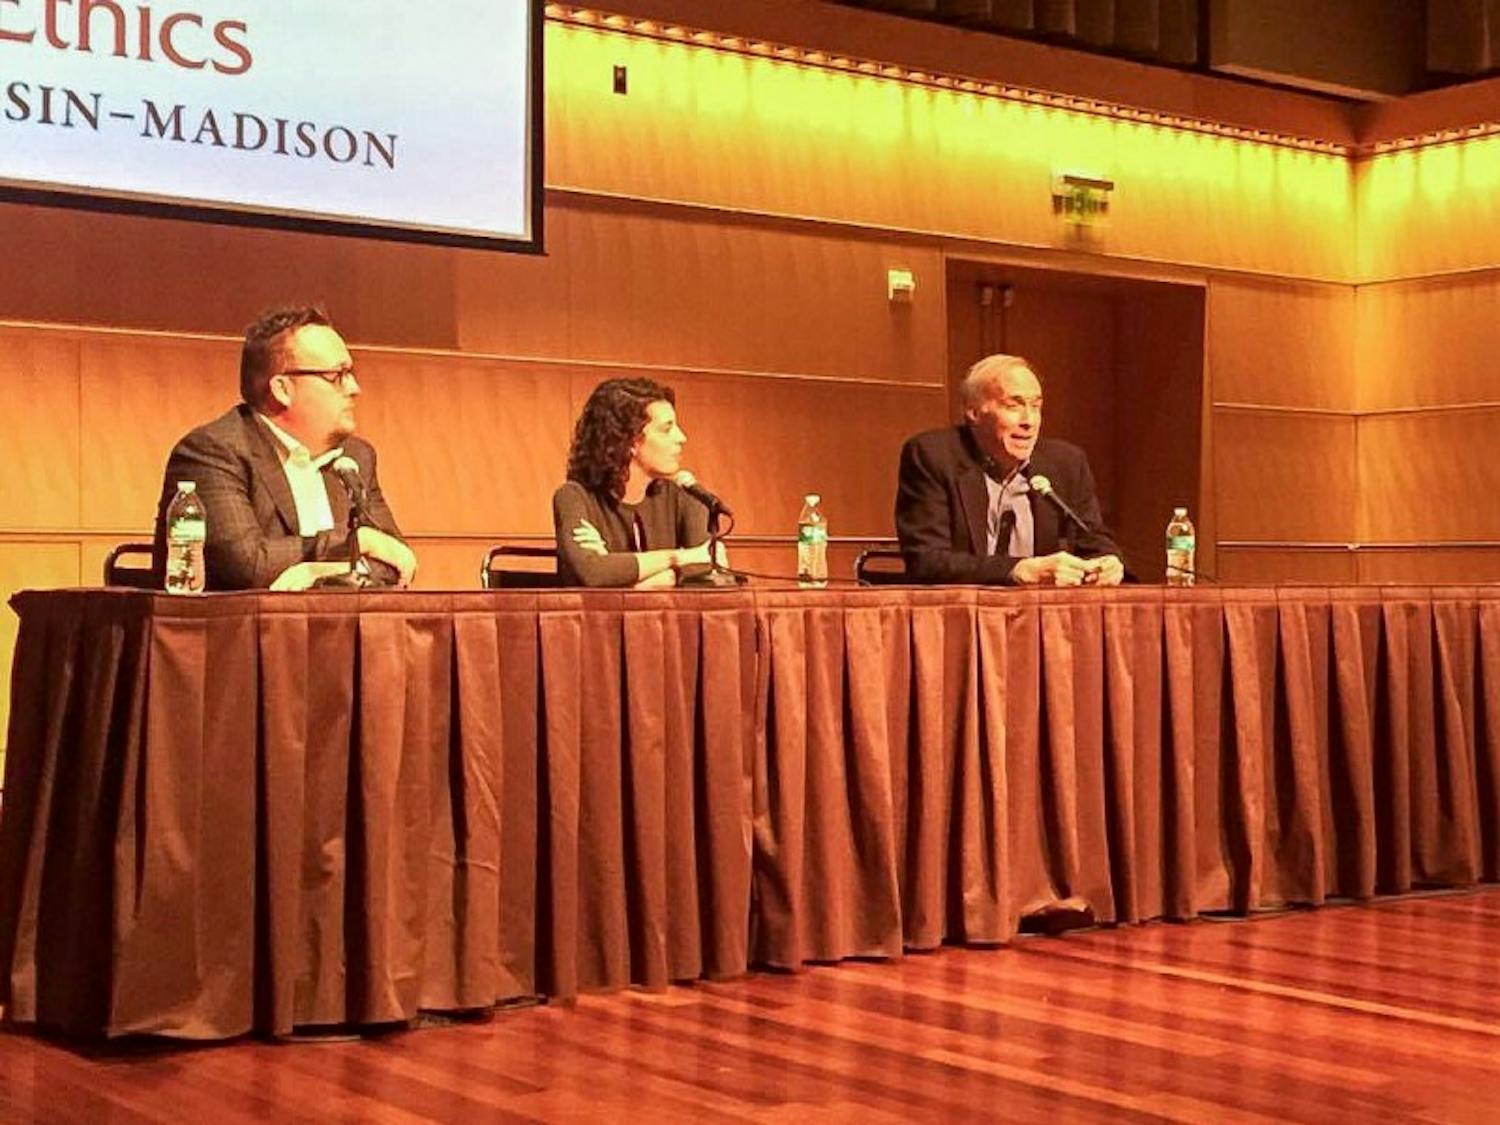 A panel of journalists and professors discussed the media’s coverage of the 2016 presidential election Thursday night at the Overture Center.